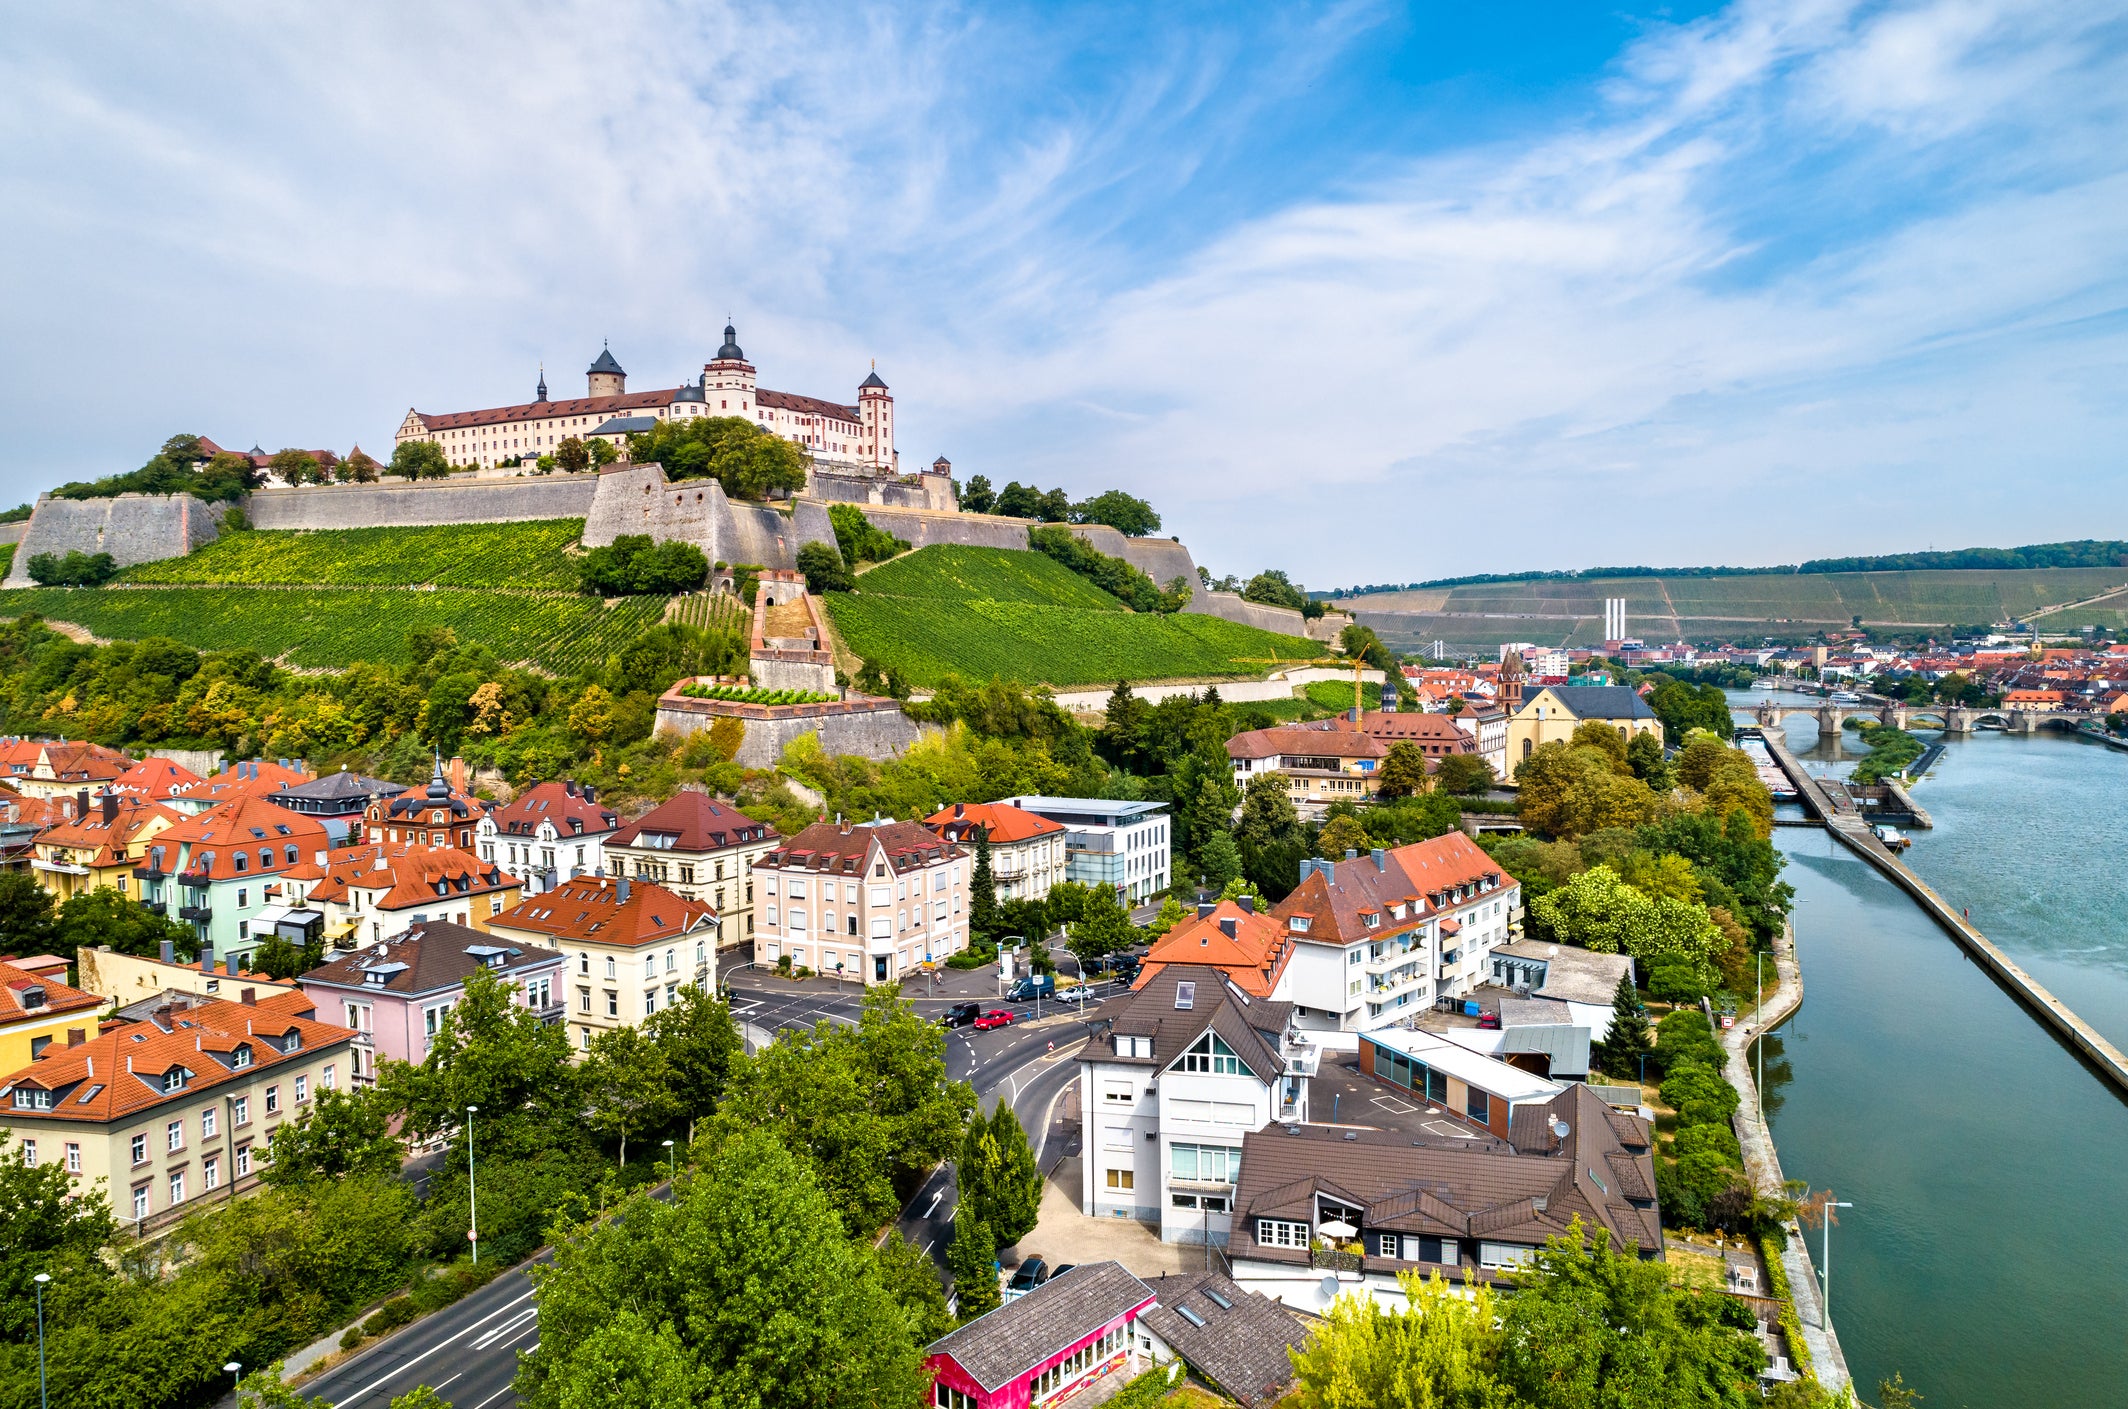 The university town of Würzburg is known for its Franconian wines